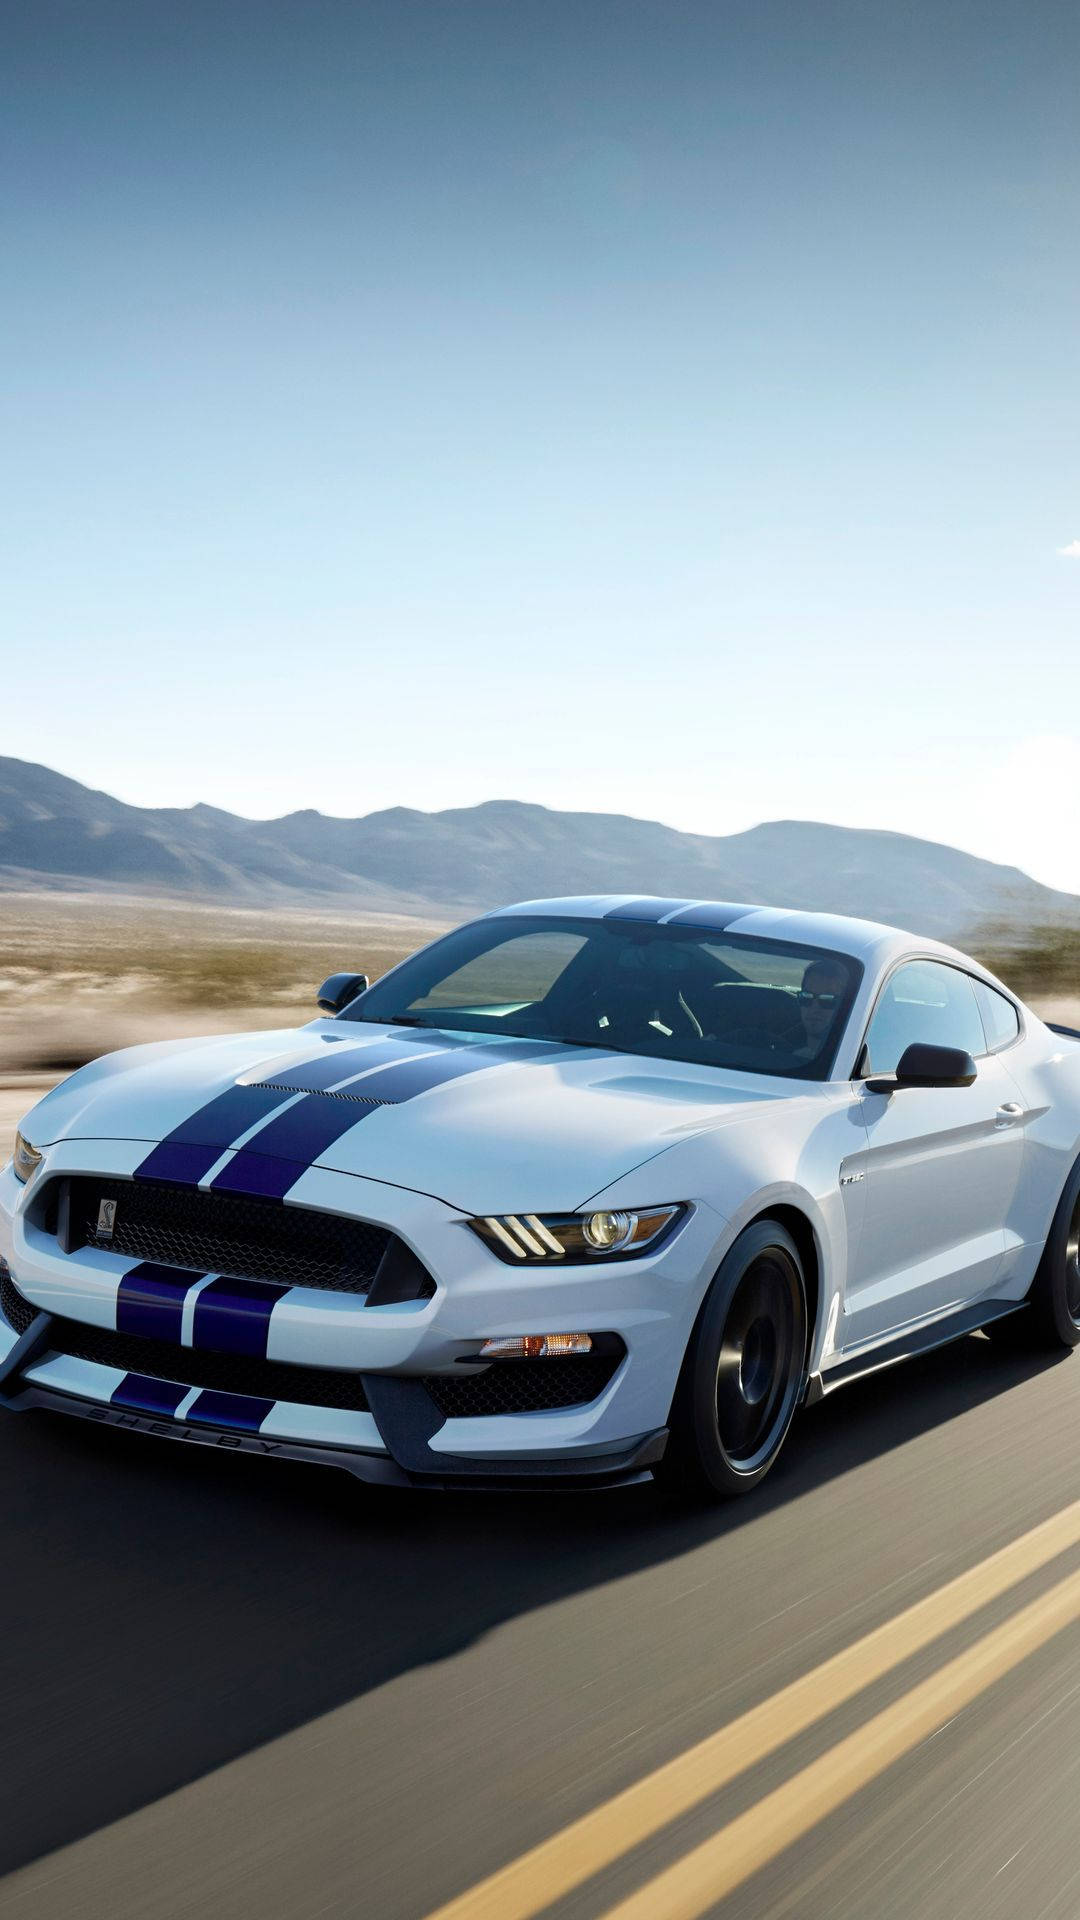 Shelby Mustang GT350 Heritage Wallpaper